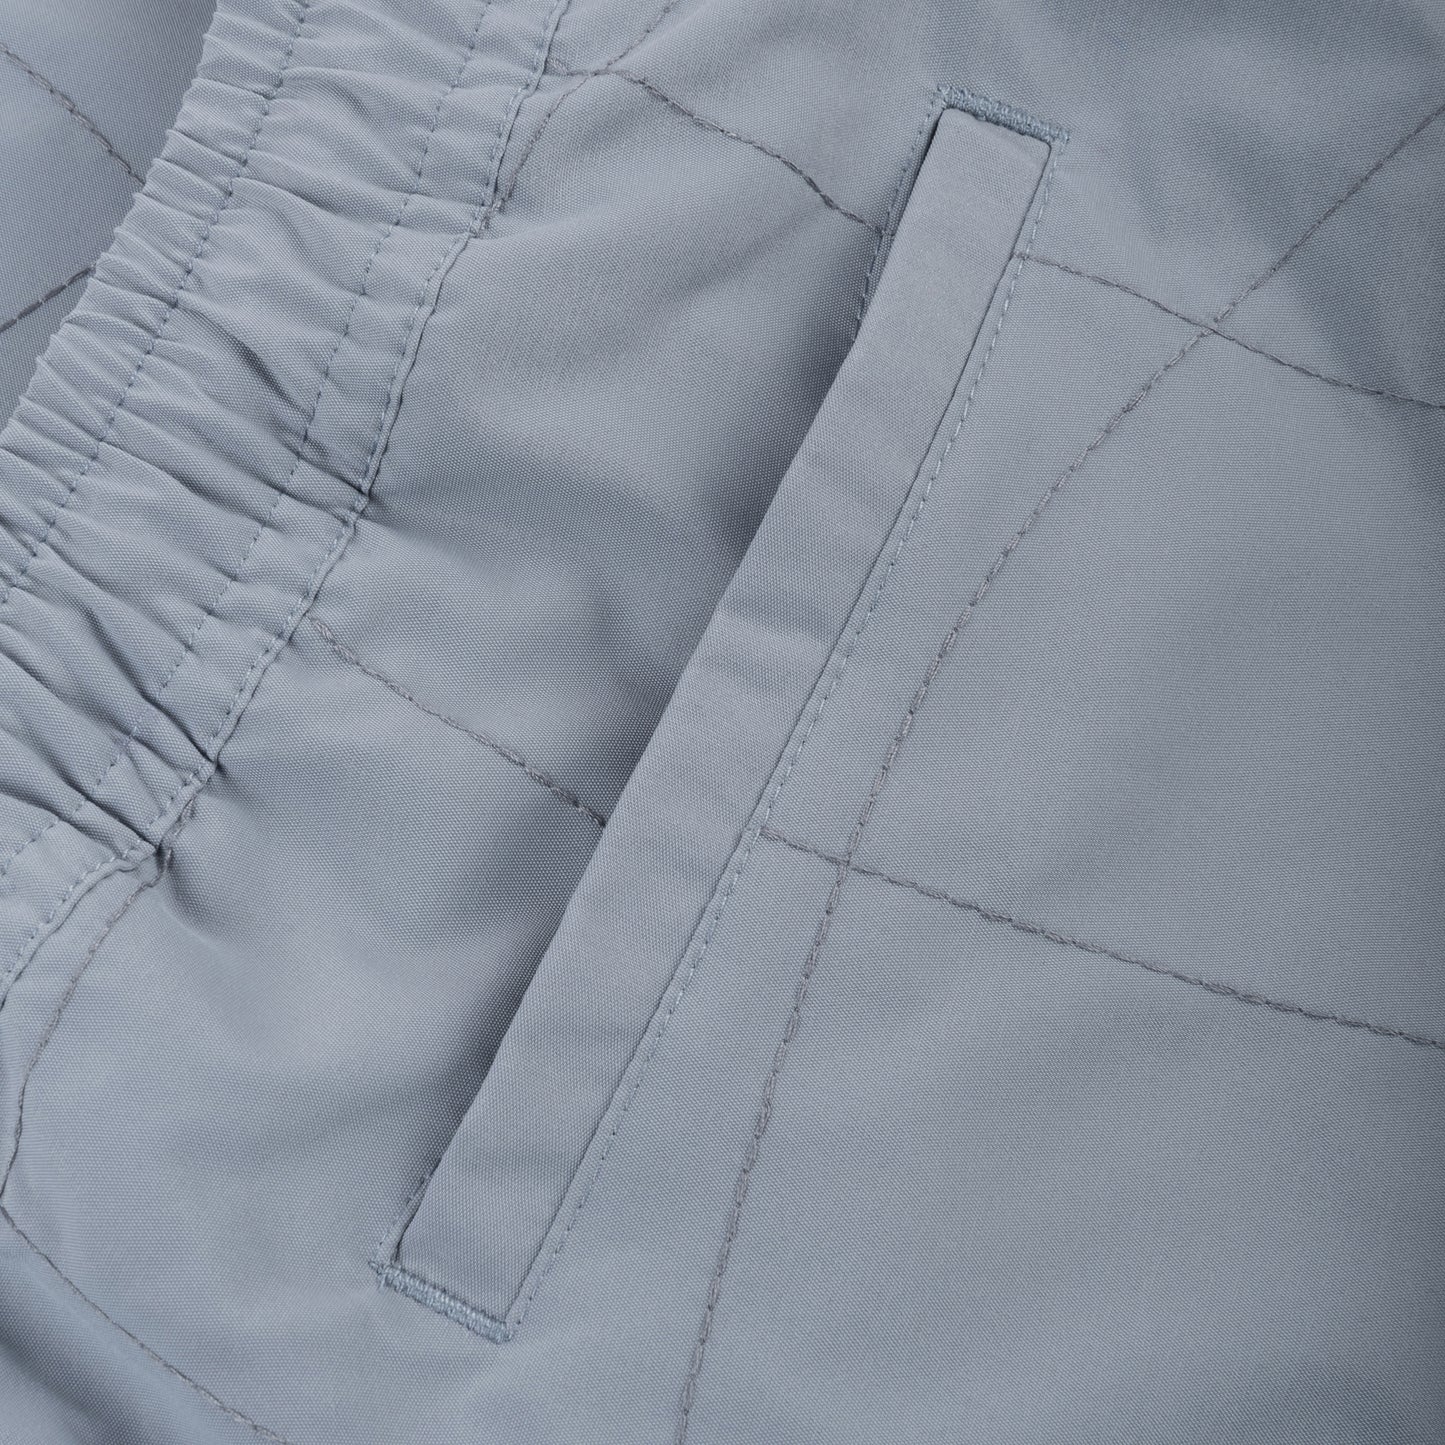 Dime - Wave Quilted Shorts - Cloud Blue